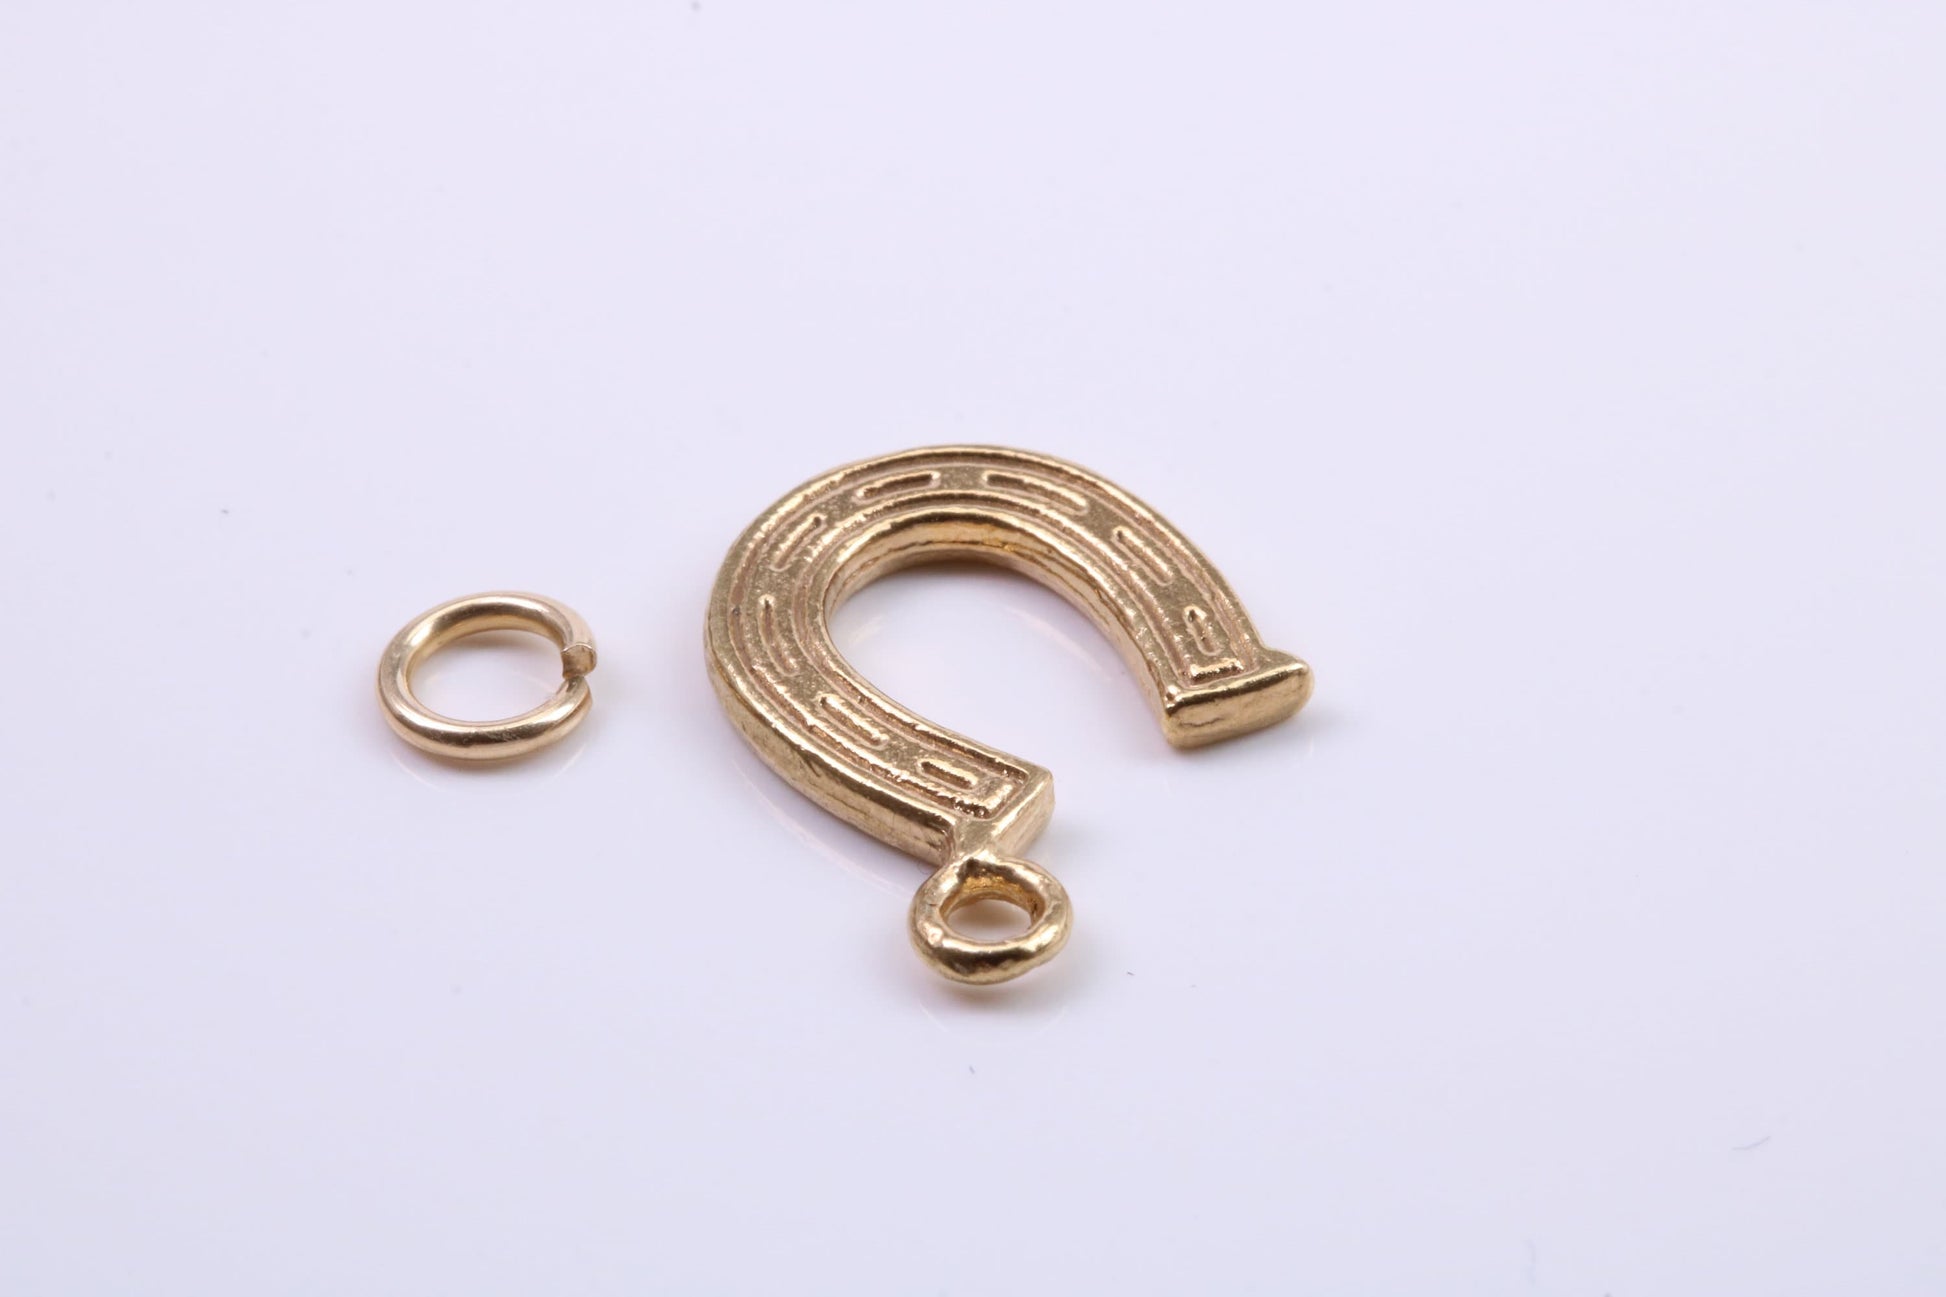 Horse Shoe Charm, Traditional Charm, Made from Solid 9ct Yellow Gold, British Hallmarked, Complete with Attachment Link